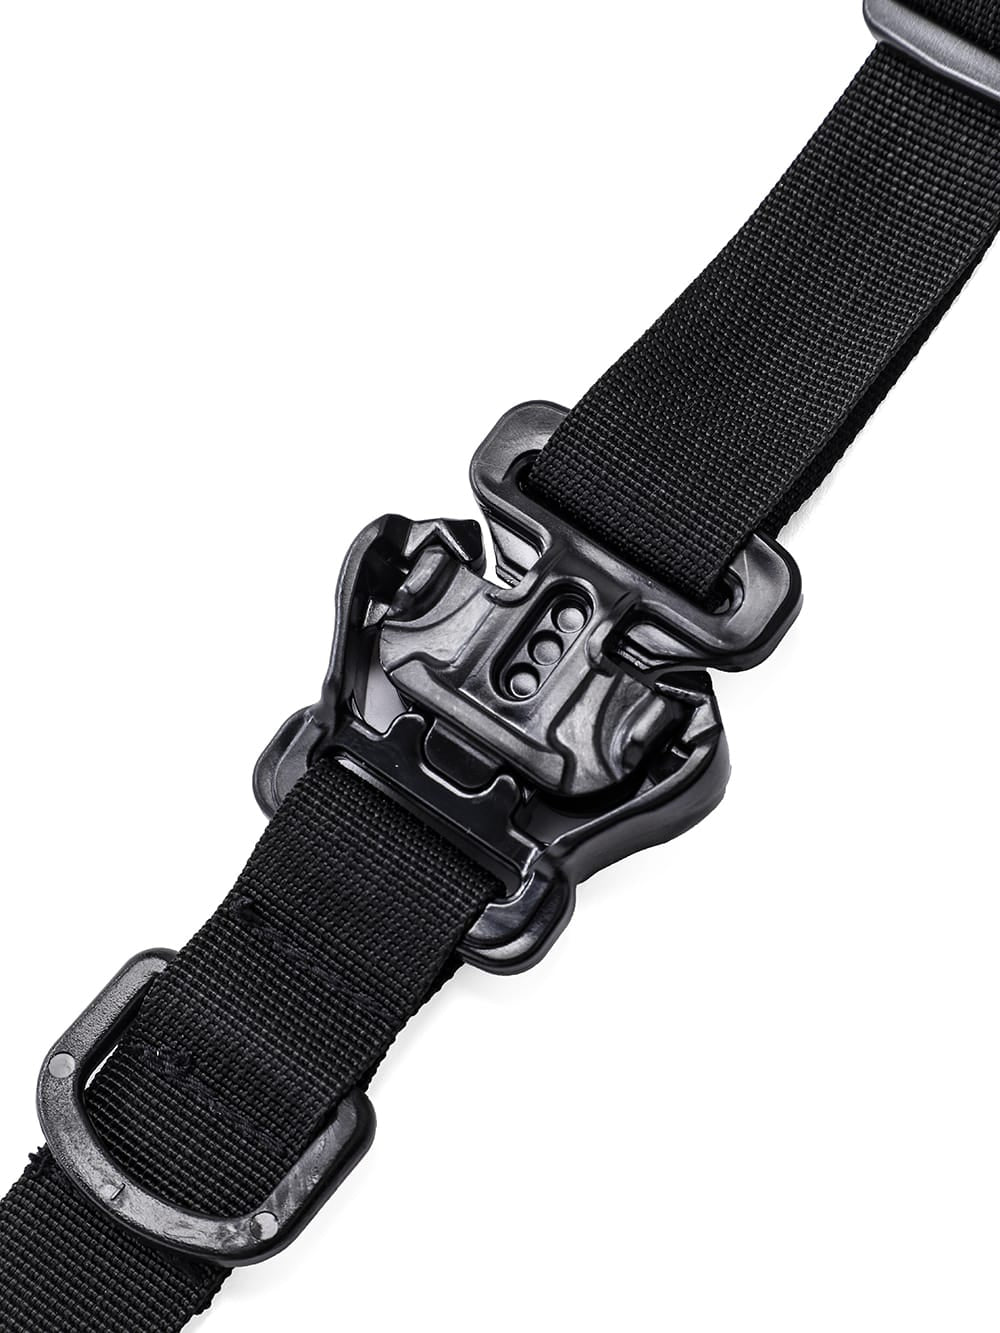 sa.0083AW23-black tactical buckle belt. THE TWO OF US 23AW 